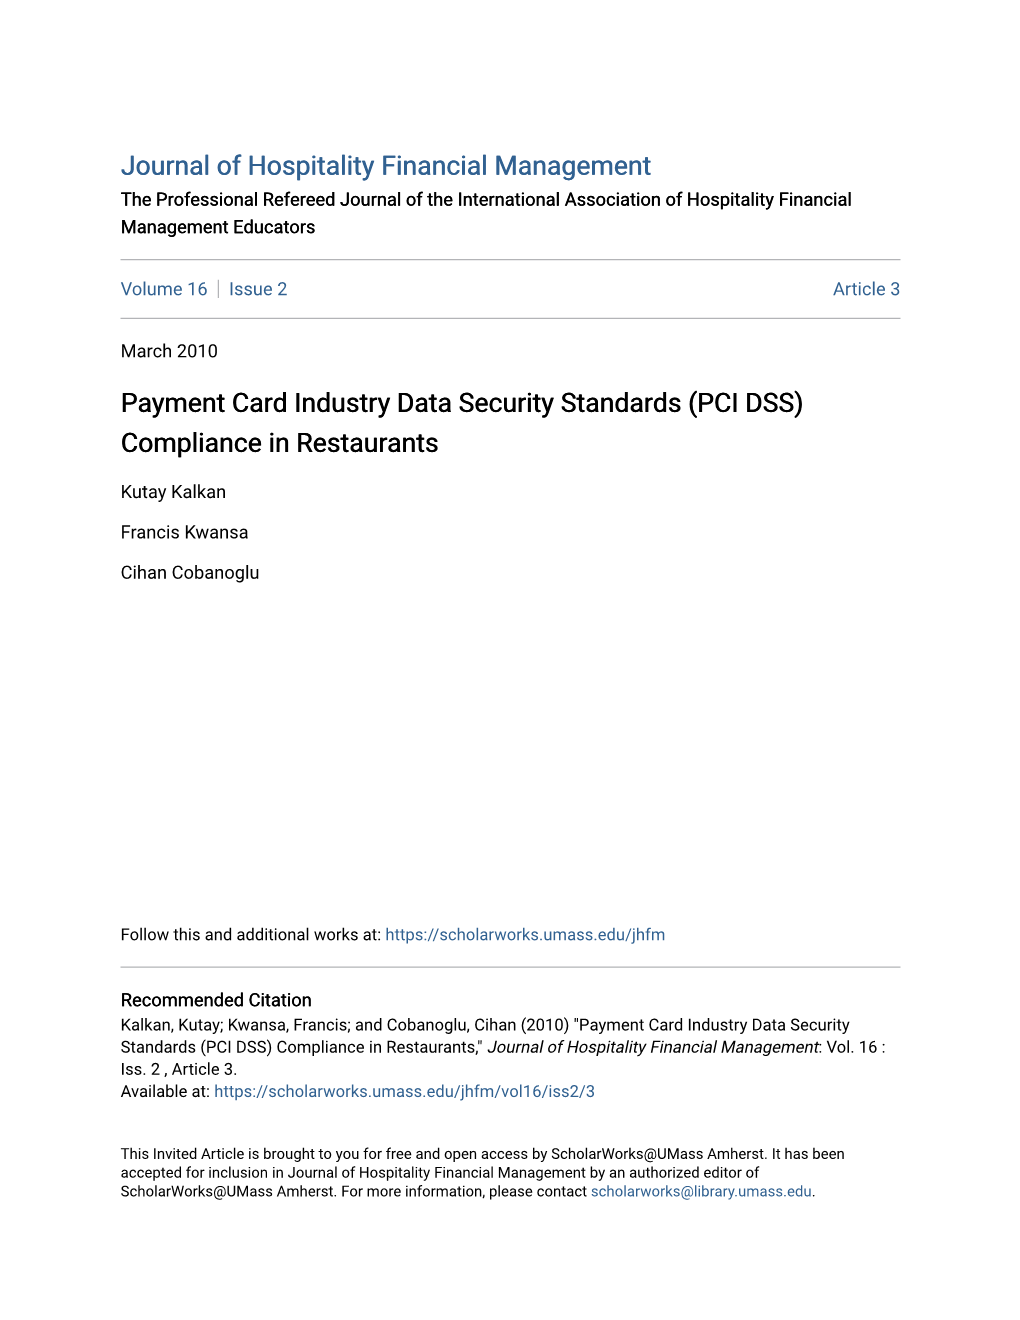 Payment Card Industry Data Security Standards (PCI DSS) Compliance in Restaurants